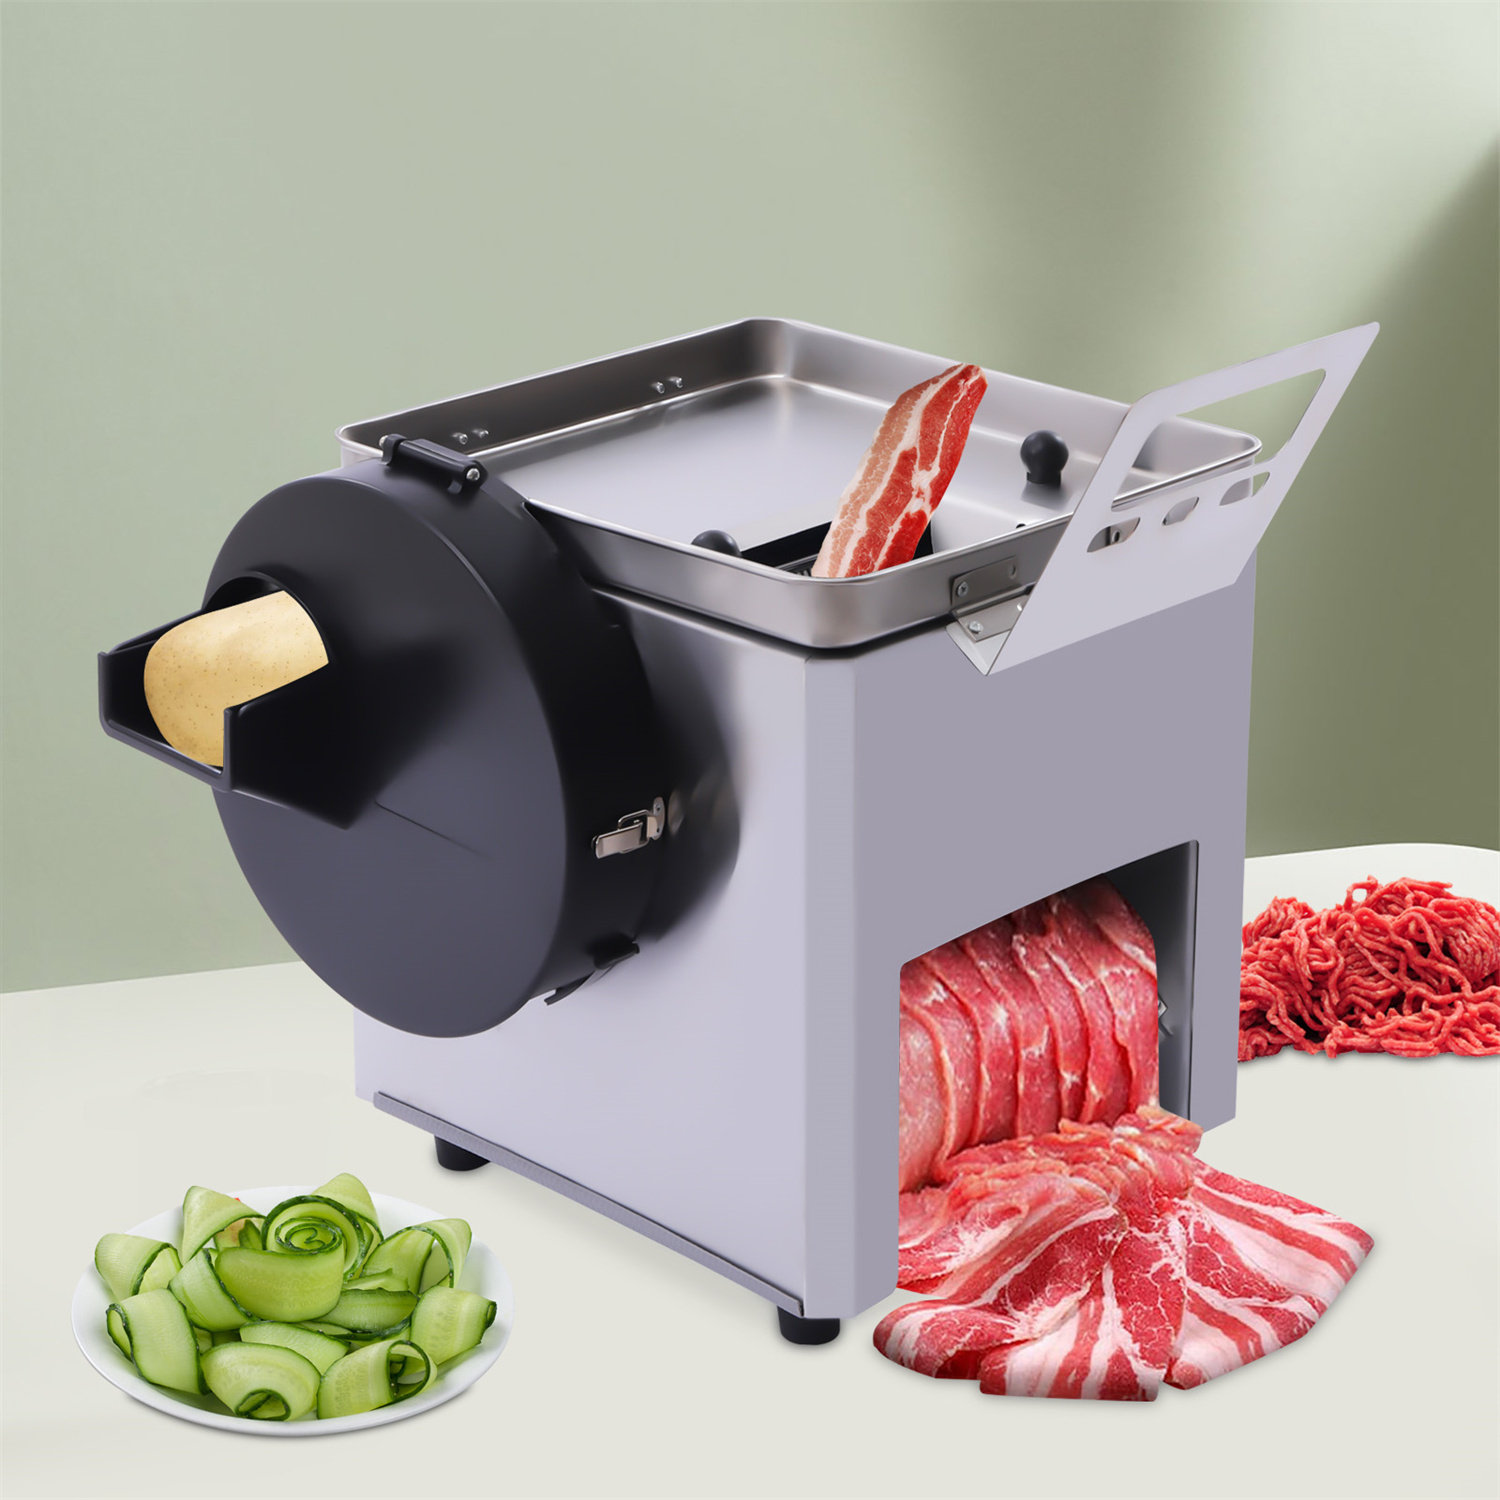 YINXIER Stainless Steel Electric Meat Slicer